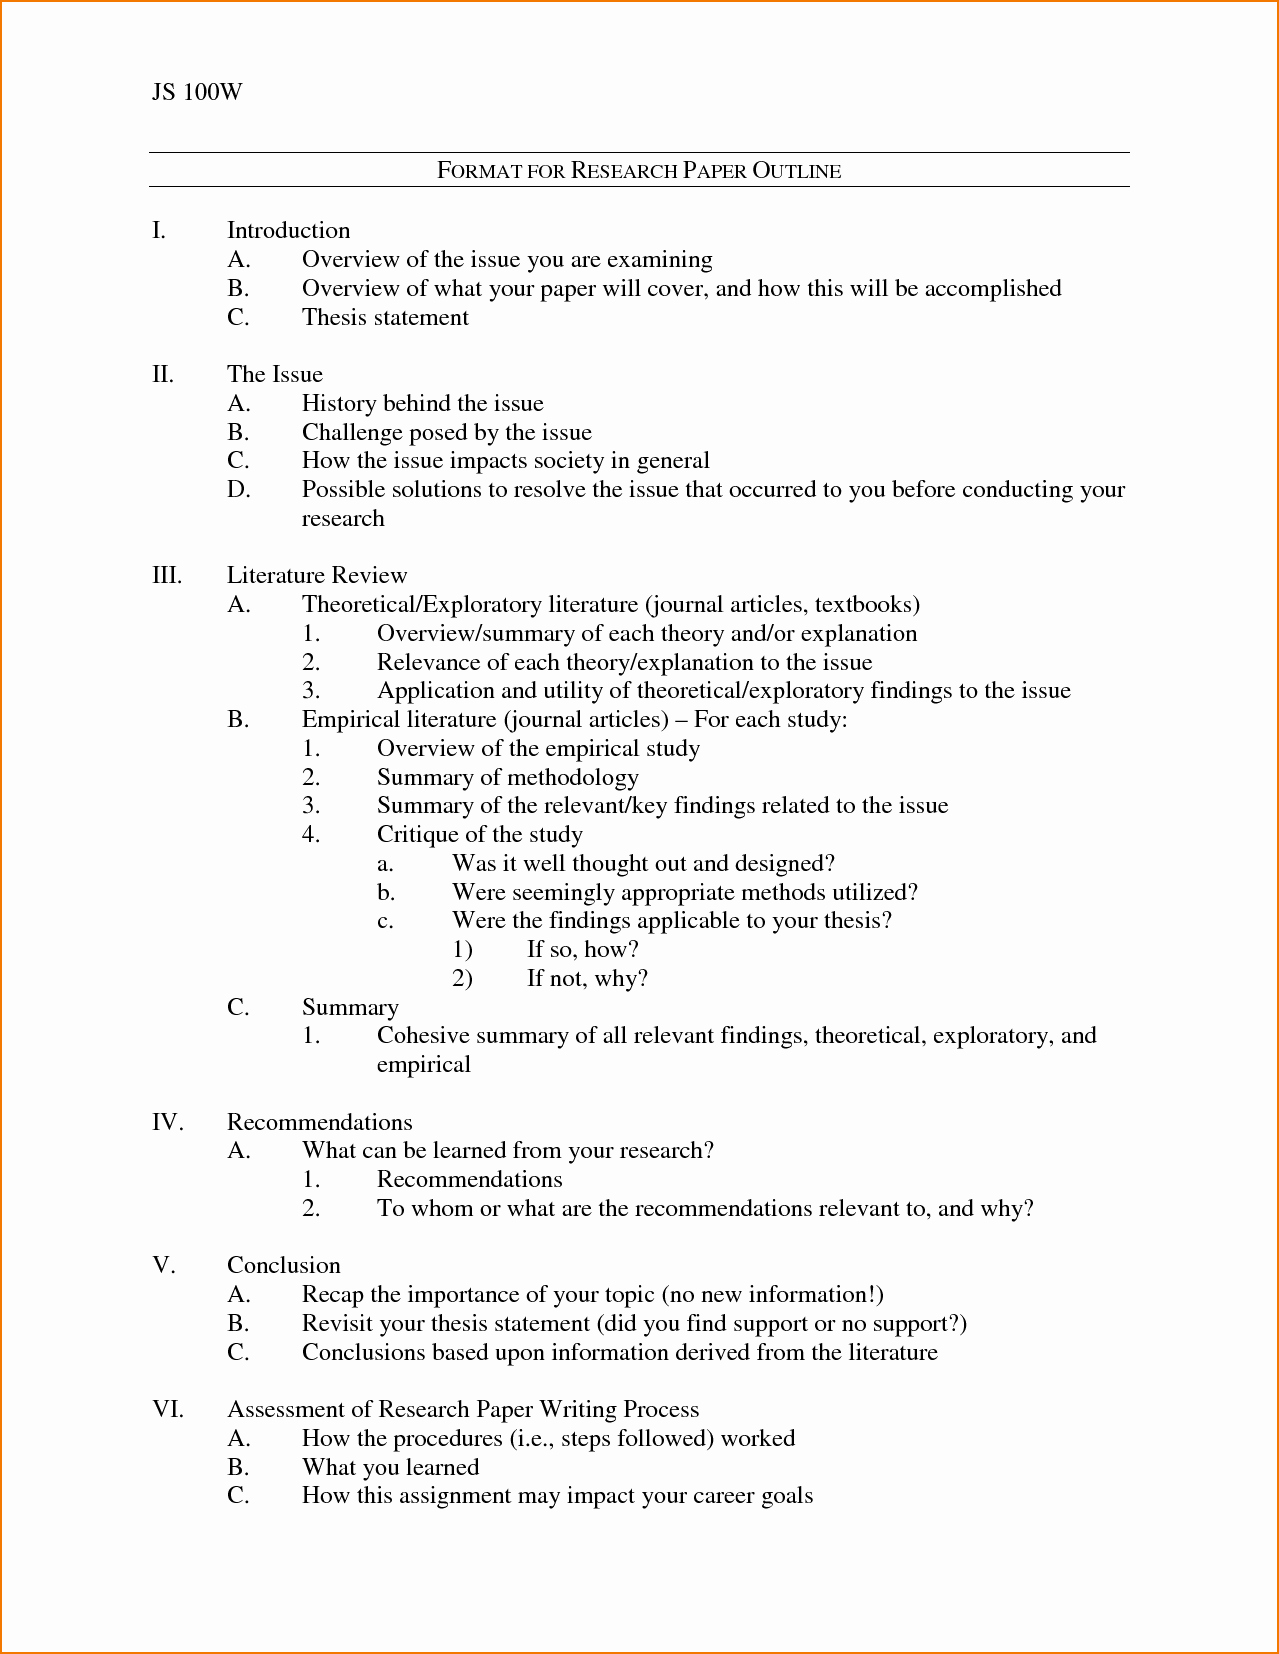 White Paper Outline Template Beautiful 5 Outline Template for Research Paper